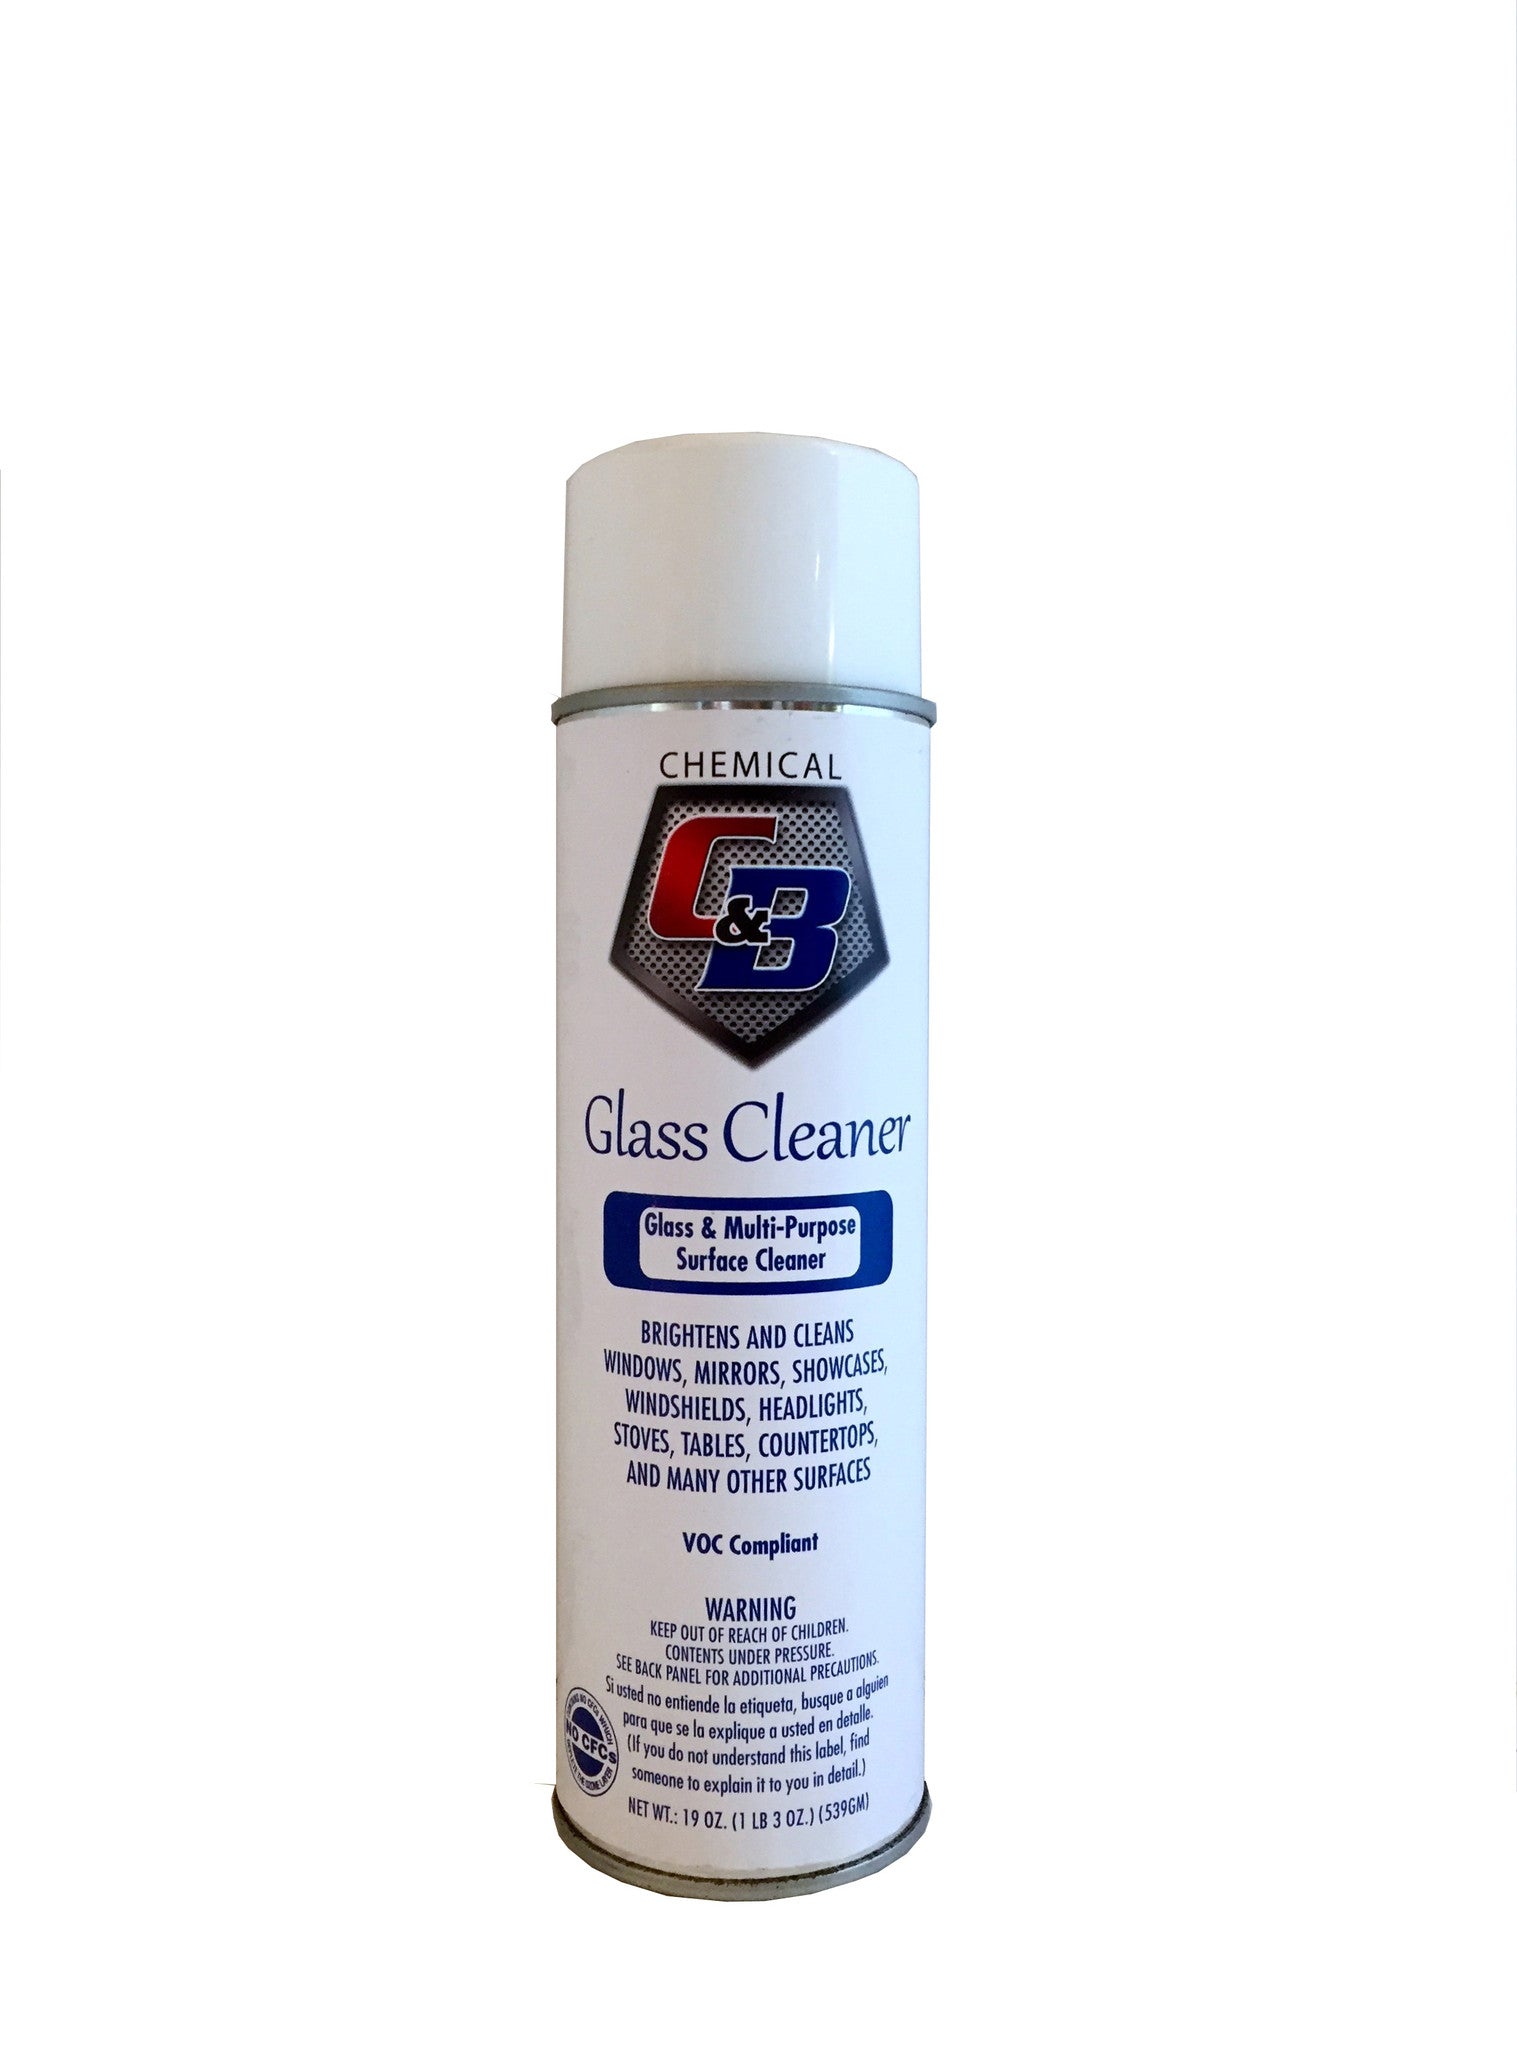 Glass & Multi-Purpose Surface Cleaner - C & B Chemical, Inc